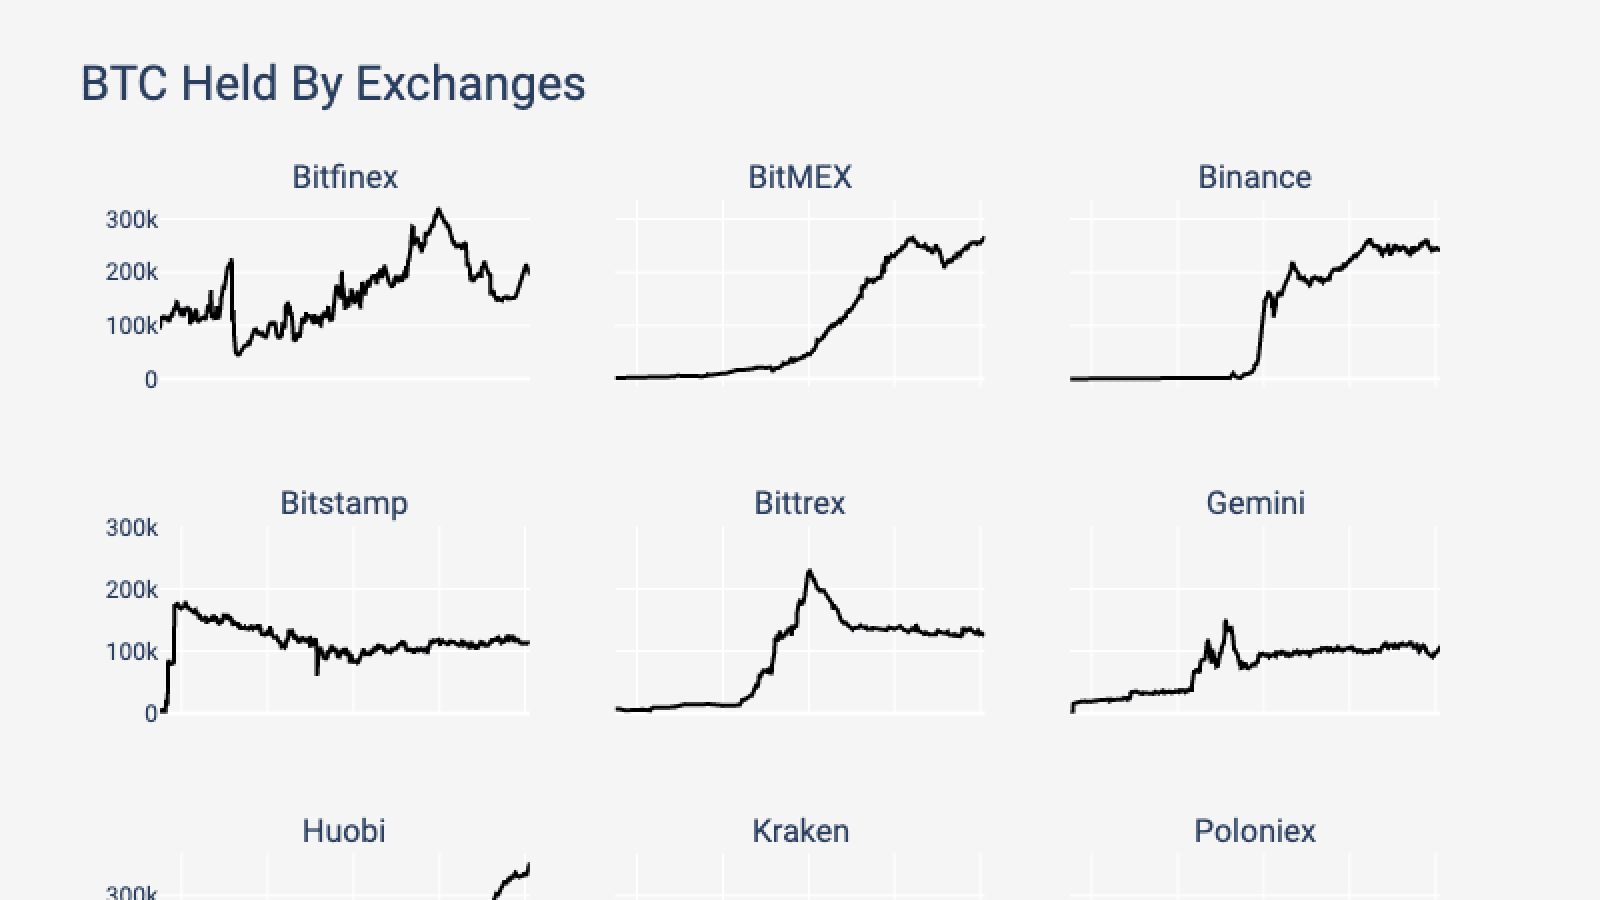 The supply of top exchanges 